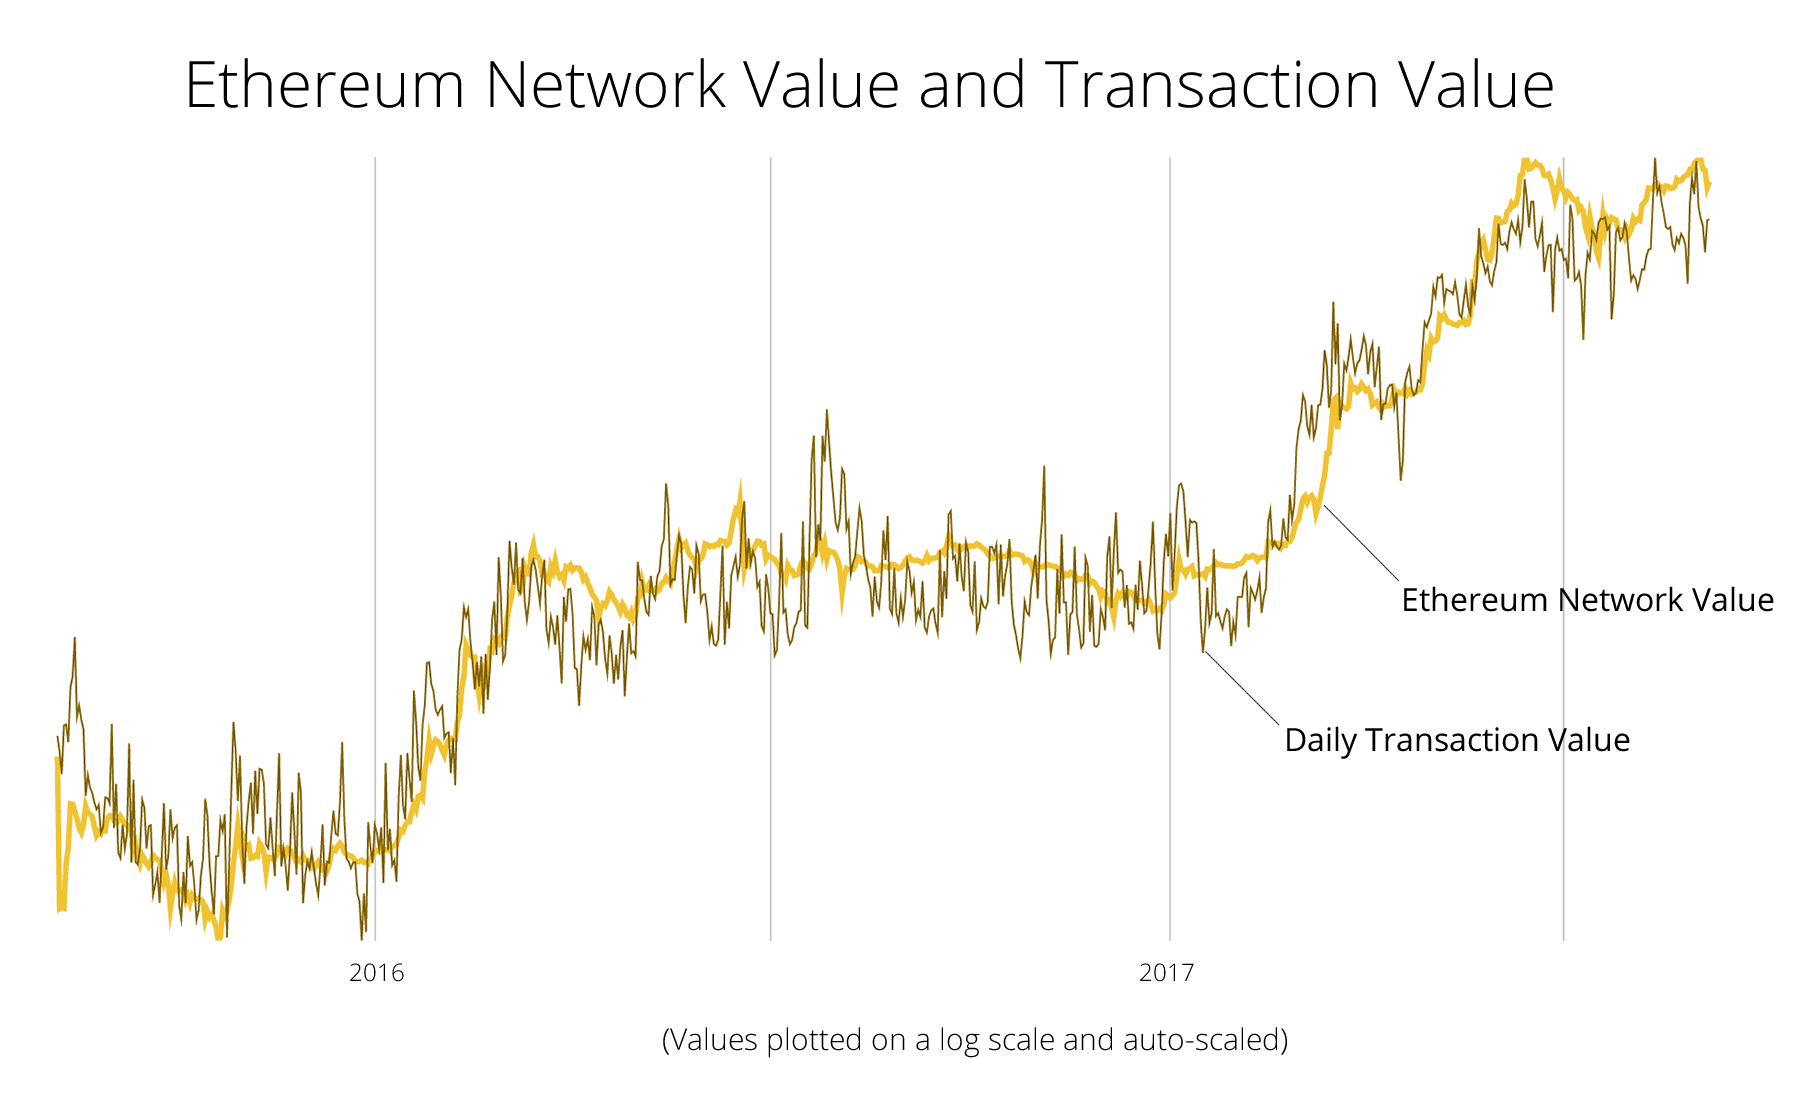 Introducing NVT Ratio (Bitcoin's PE Ratio), use it to detect bubbles